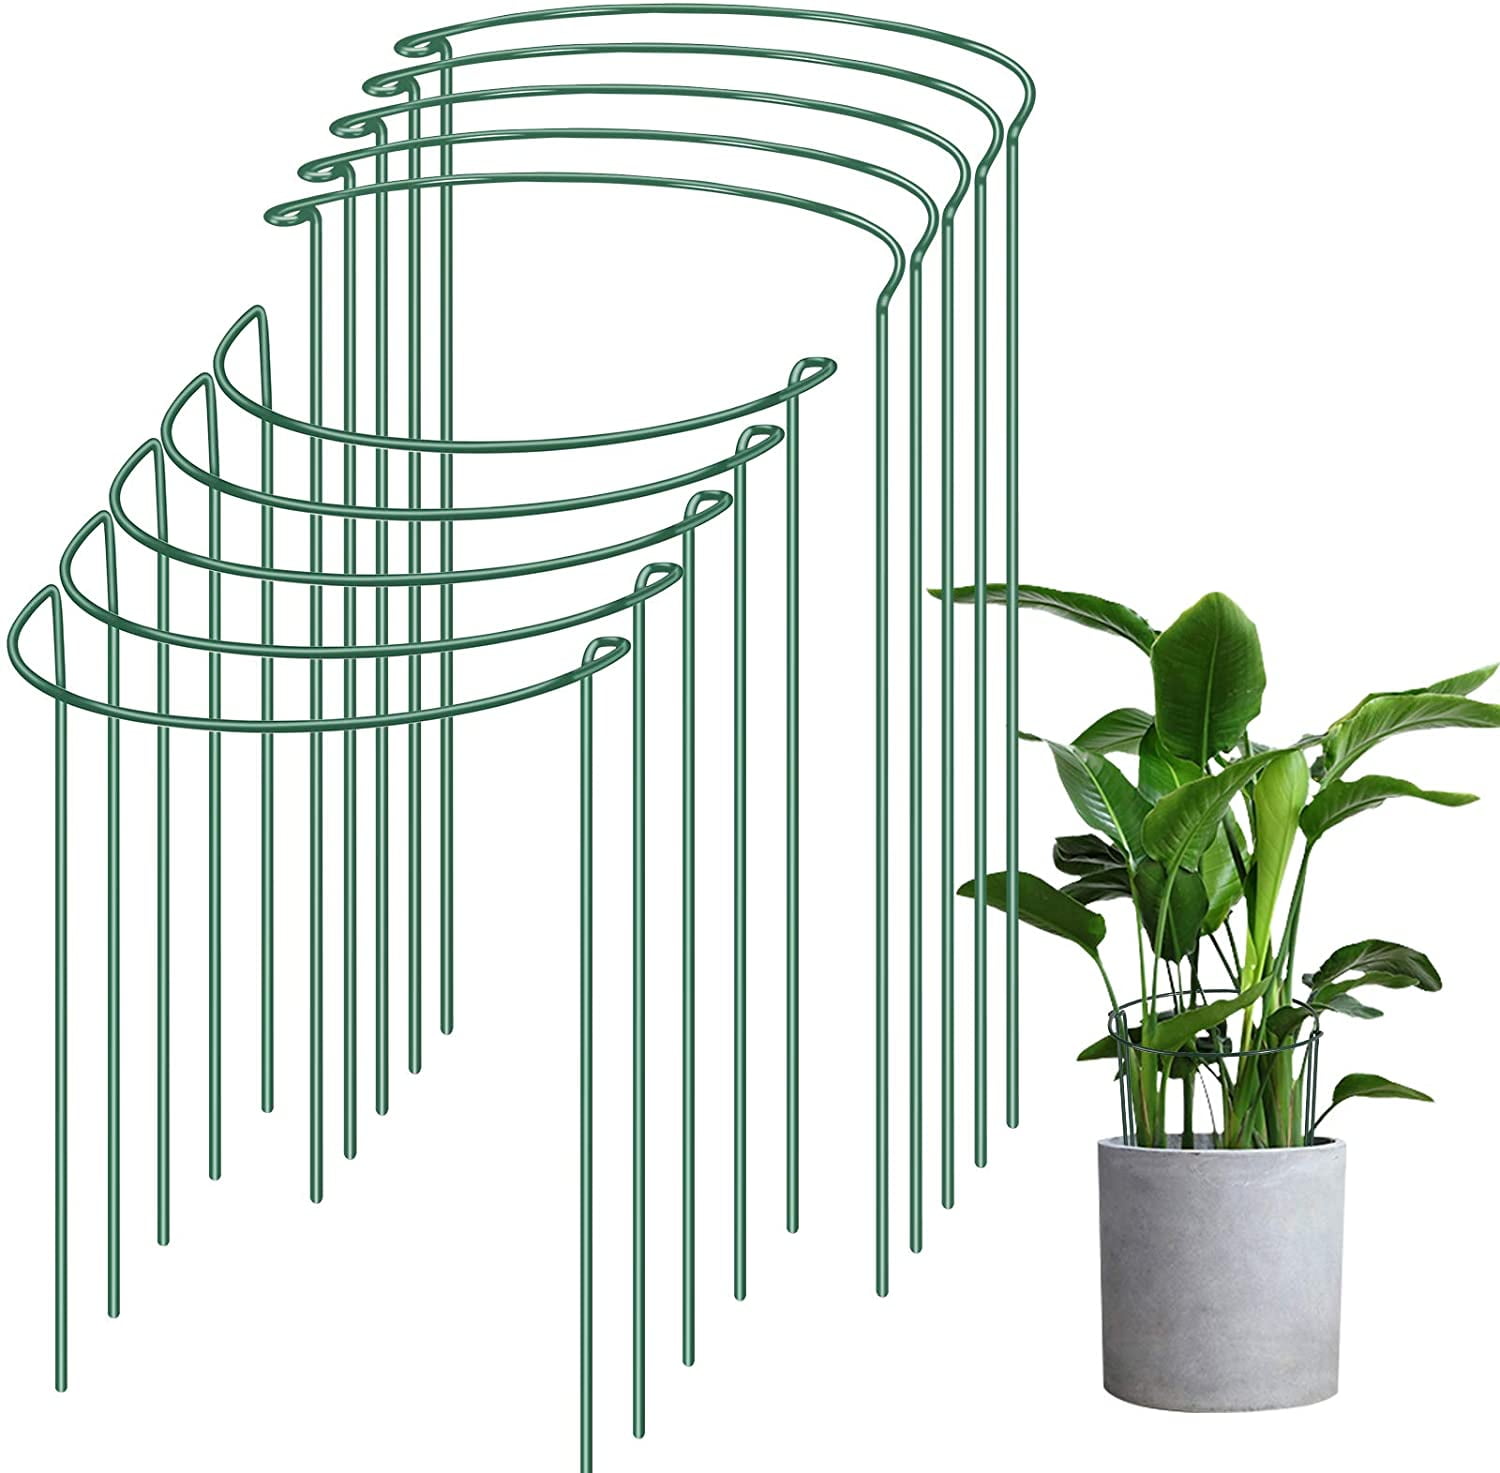 Garden Stakes & Plant Clips Bundle: 20 Weatherproof Plastic Coated Steel Plant Stakes 24in Large & Small Vine Clips for Stem & 20 Garden Clips for Flowers & Vegetables Tree & Potted Plant Support 